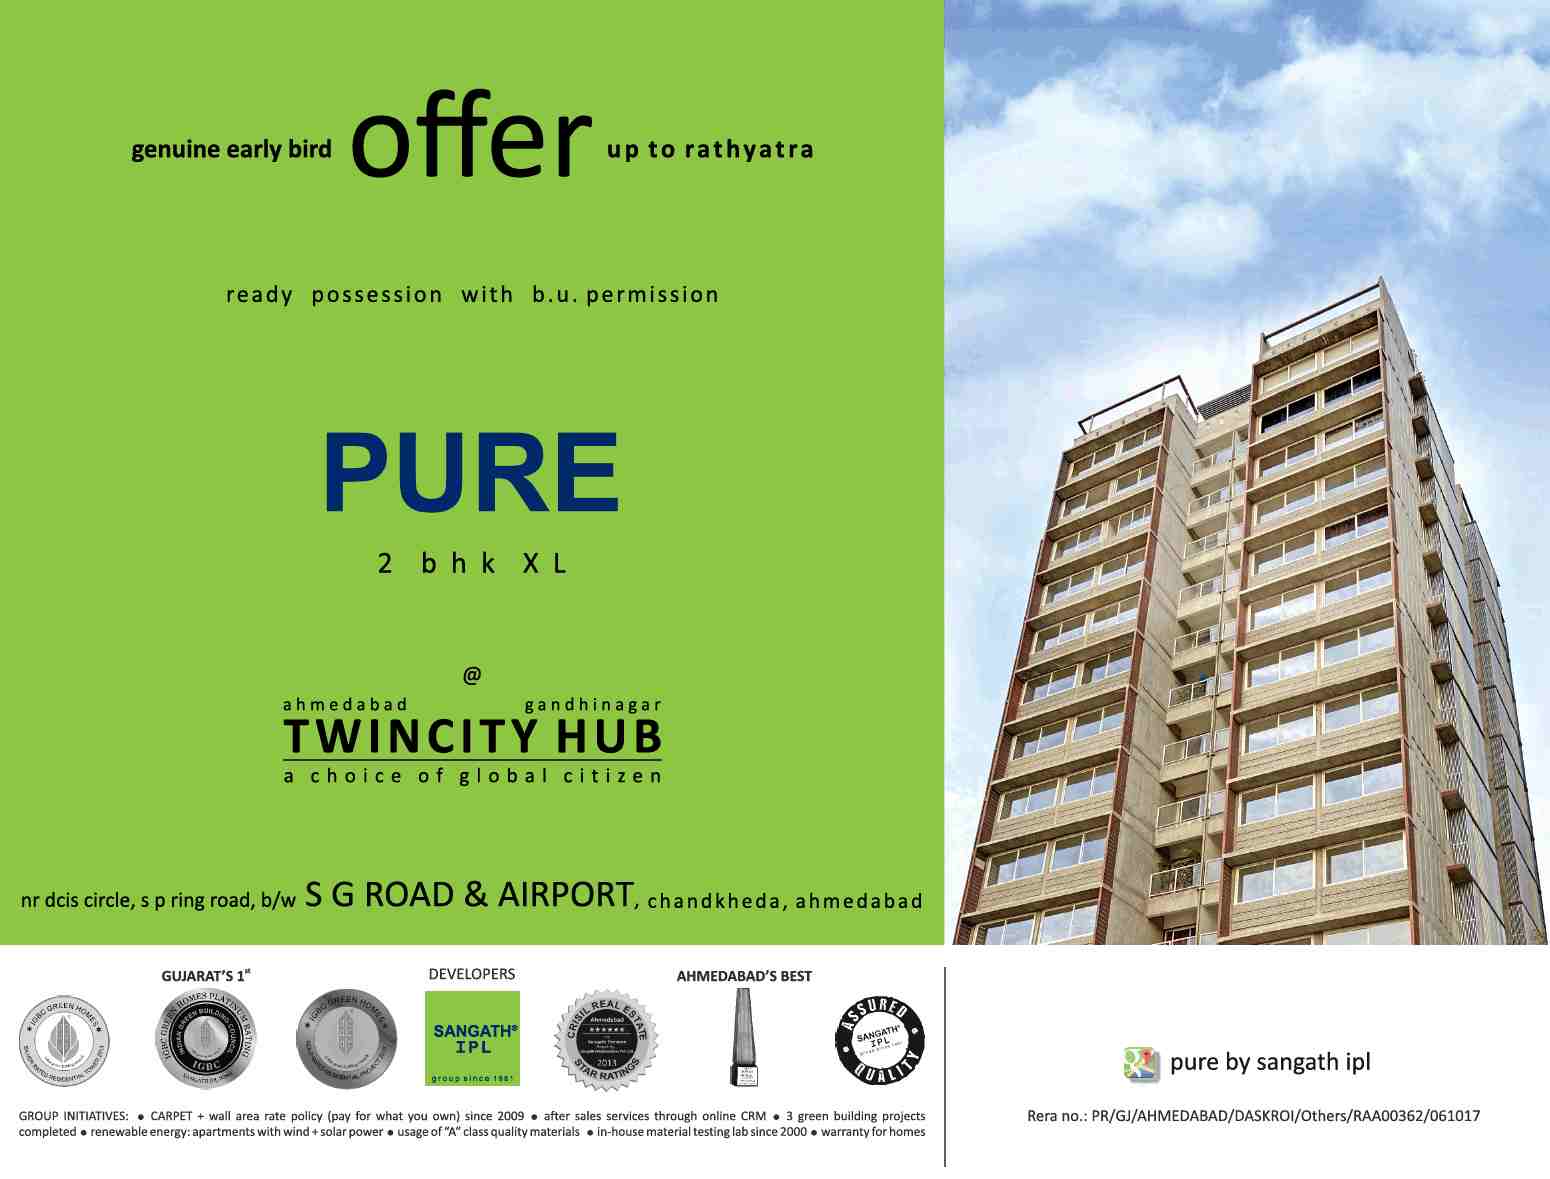 Book 2 BHK XL homes at Sangath IPL Pure in Ahmedabad Update